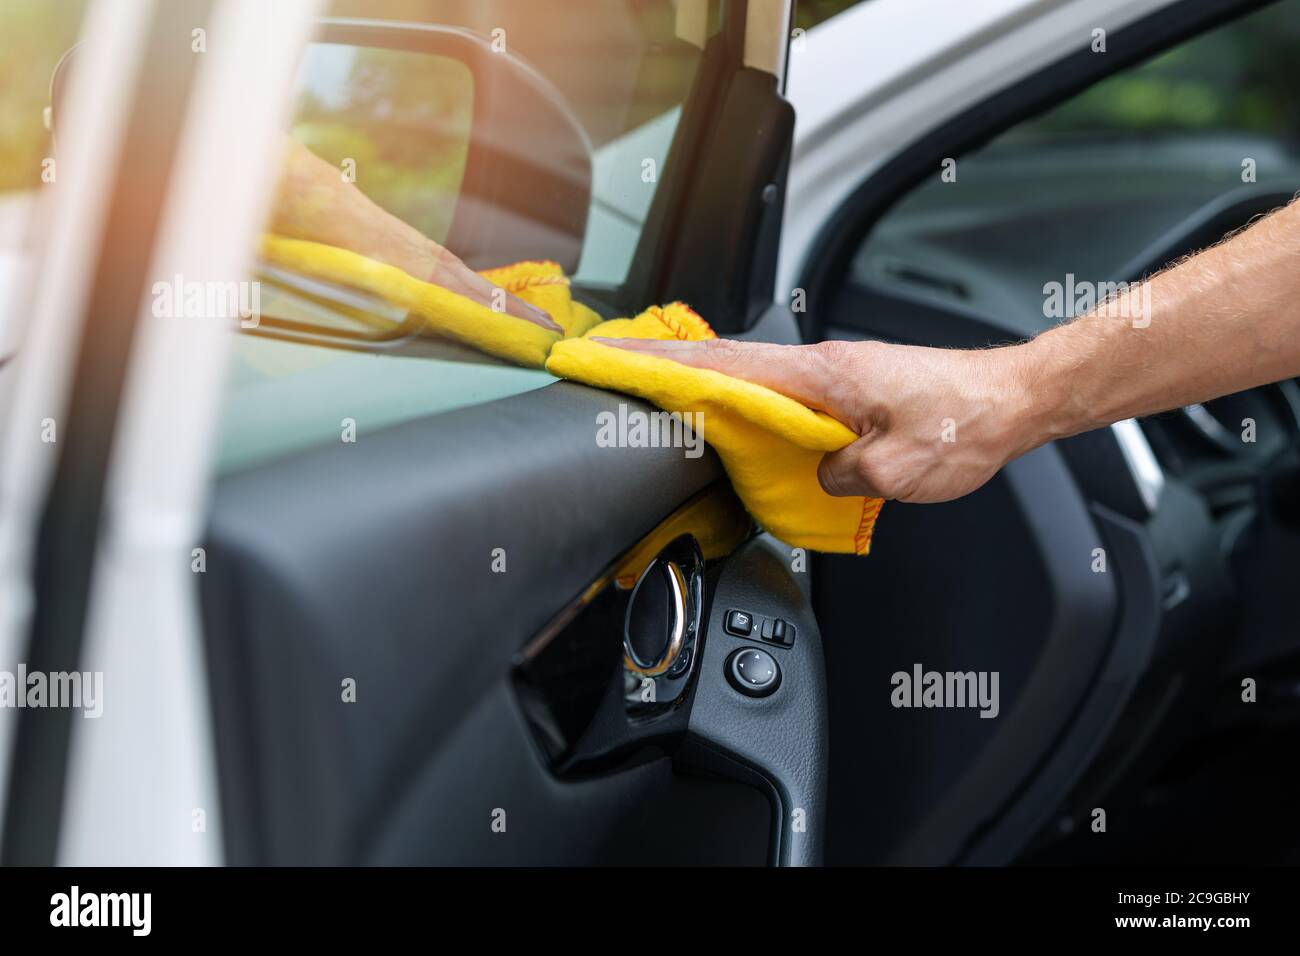 hand with microfiber cloth cleaning car interior Stock Photo